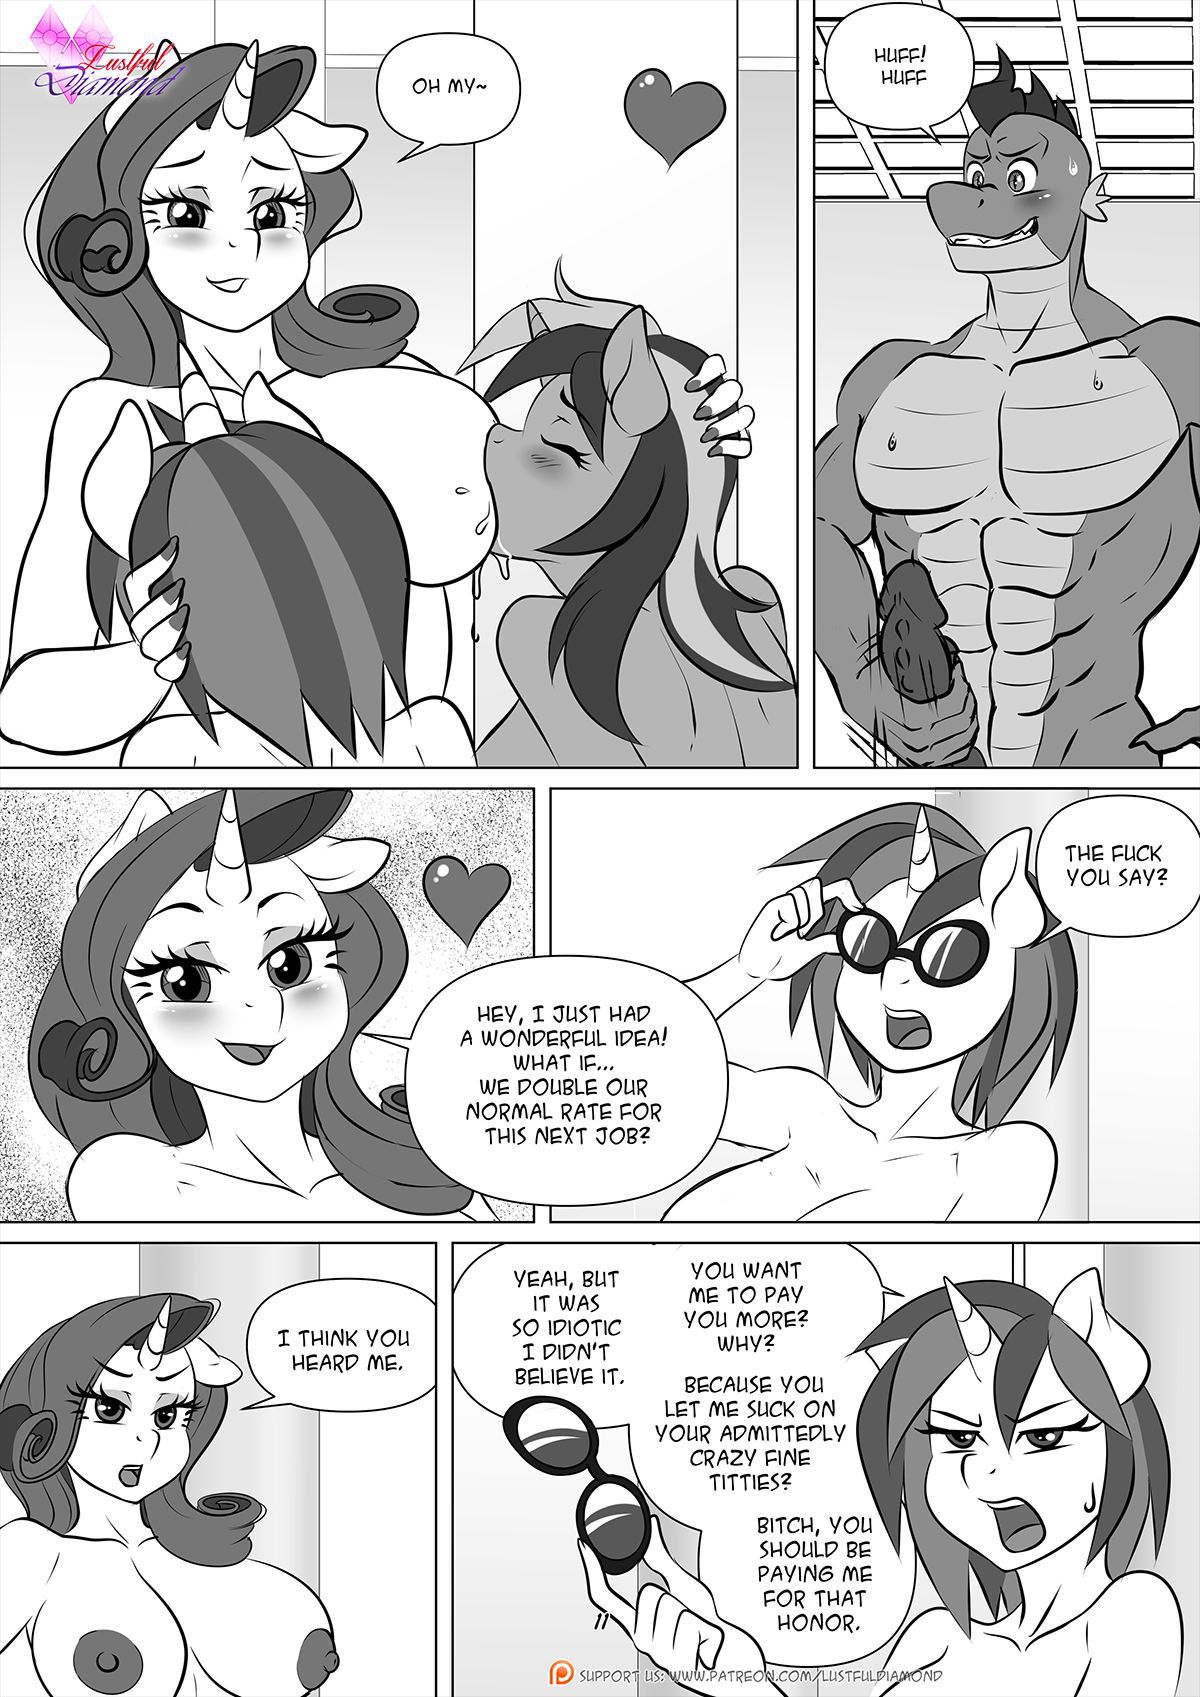 [Pia-Sama] Lustful Diamond - In the Pool (My Little Pony: Friendship is Magic) {Ongoing} 12